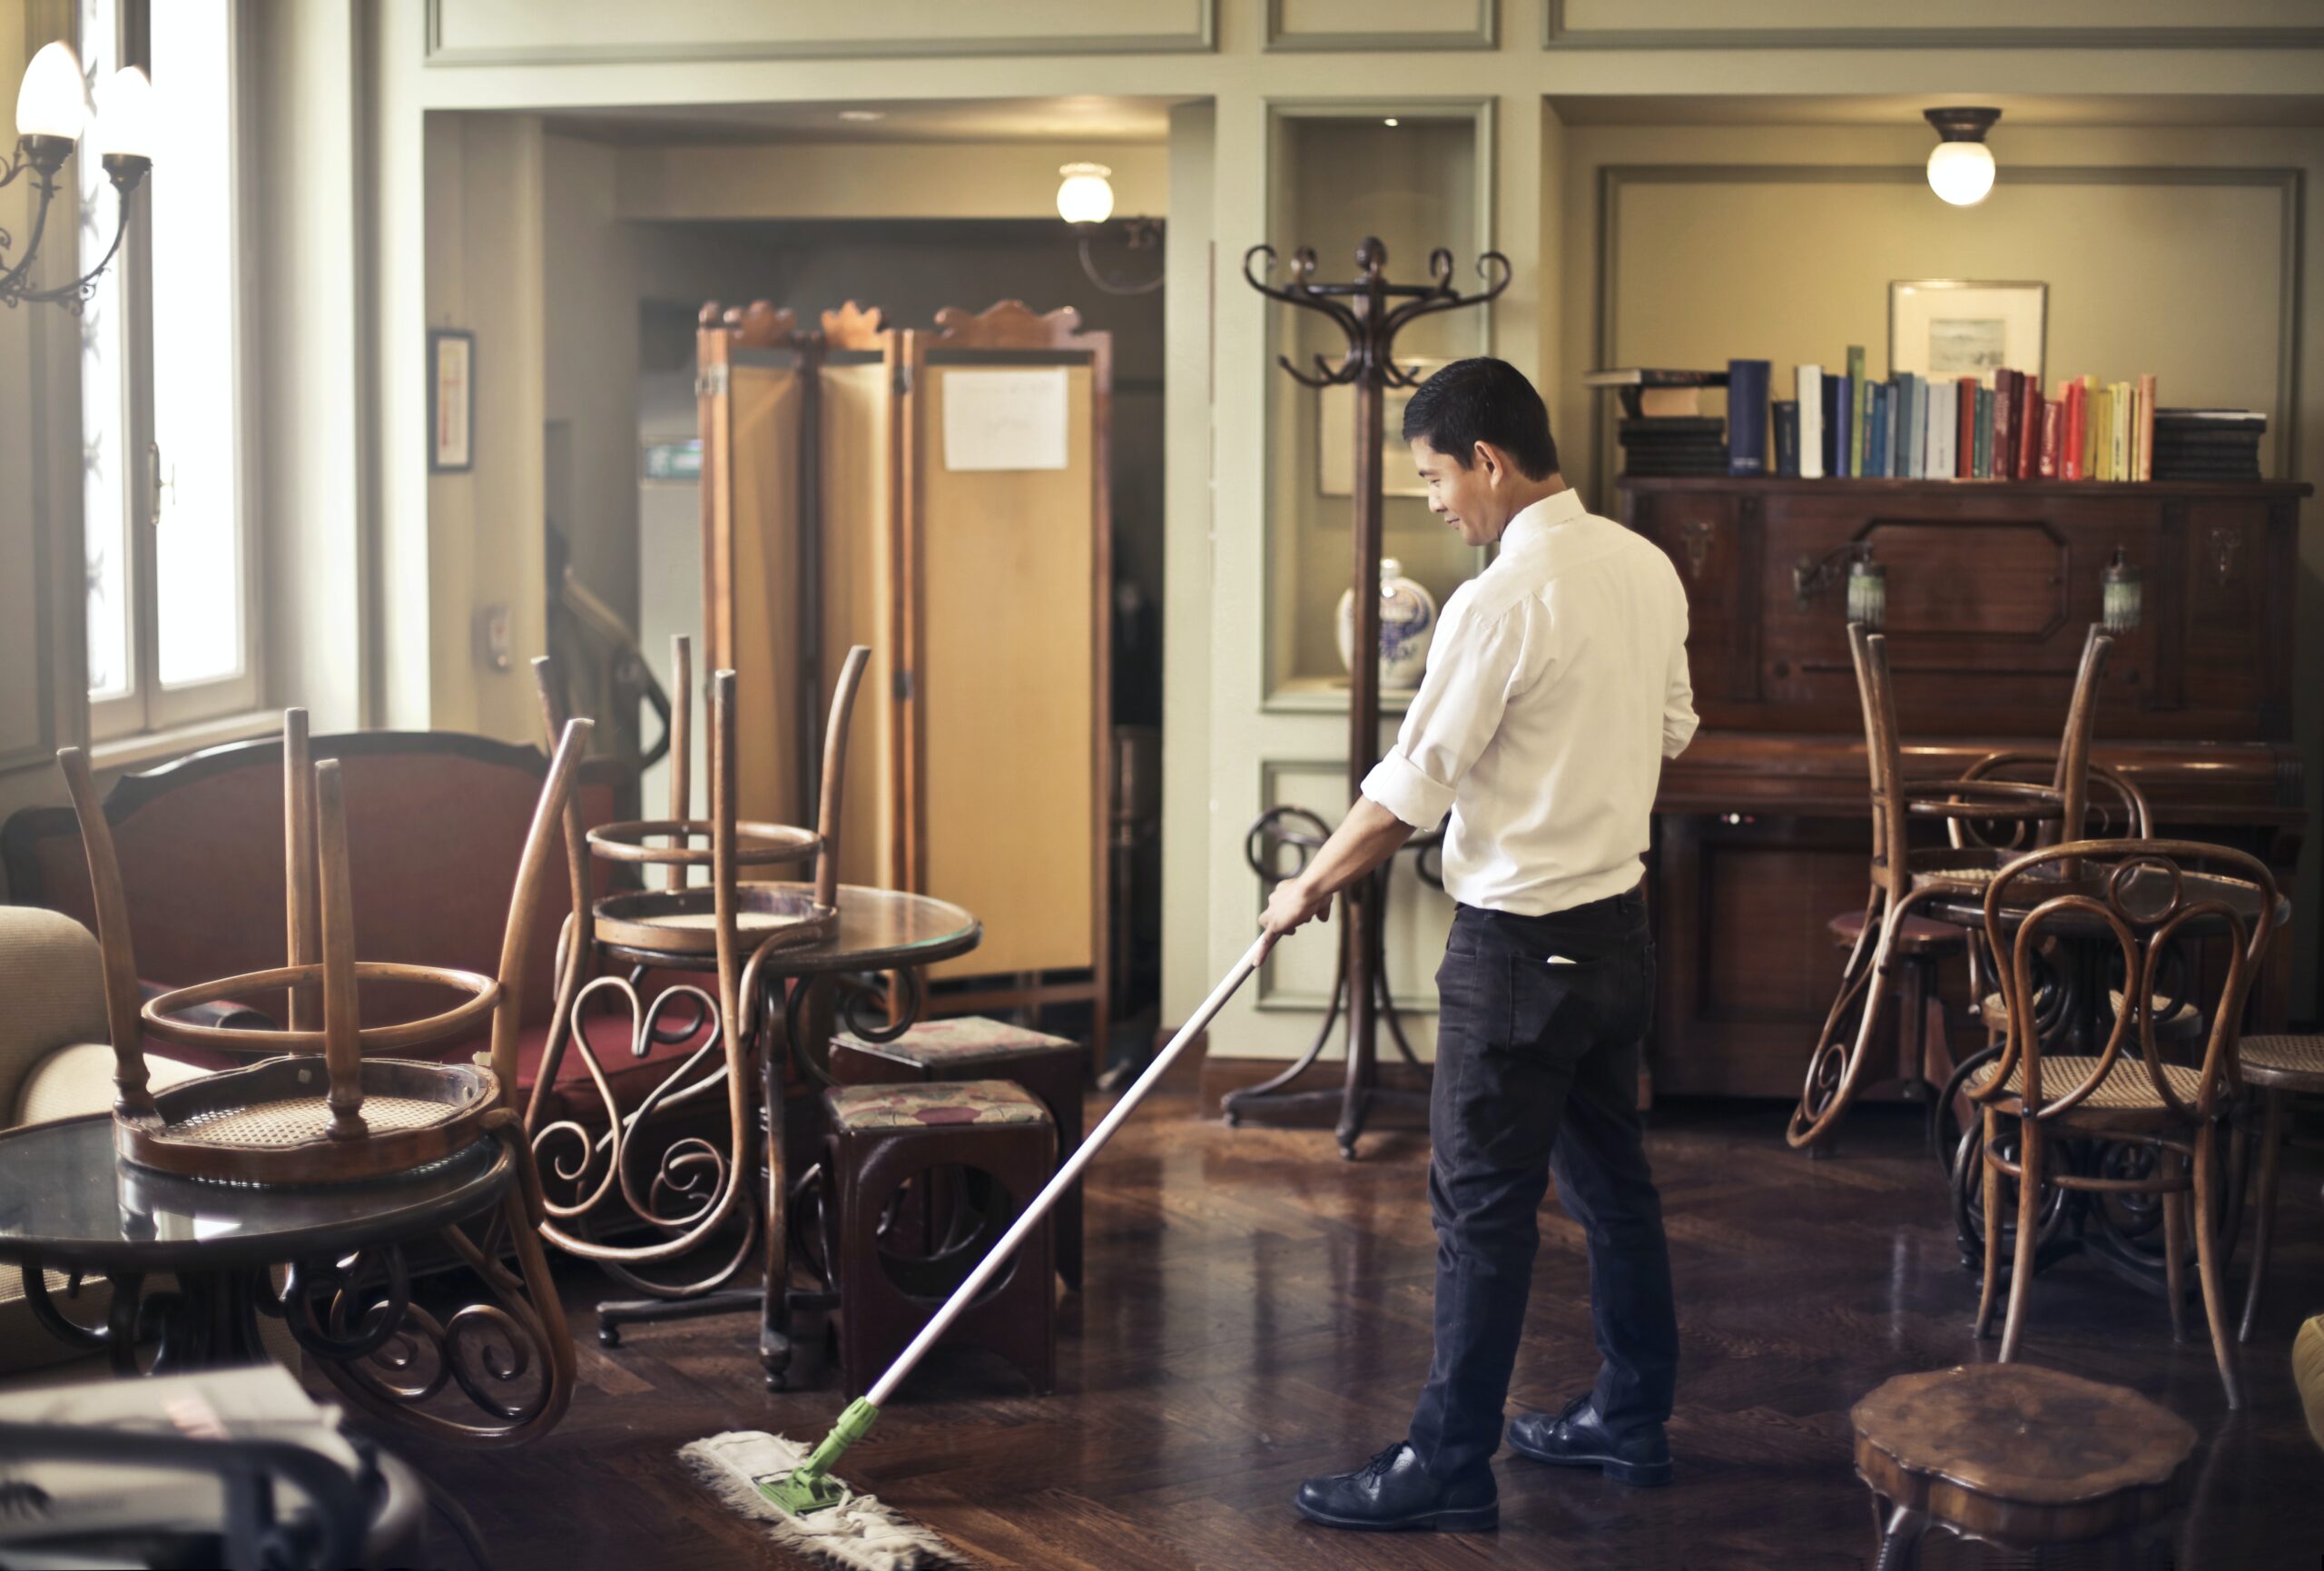 Indianapolis Janitorial Service cleaning restaurant